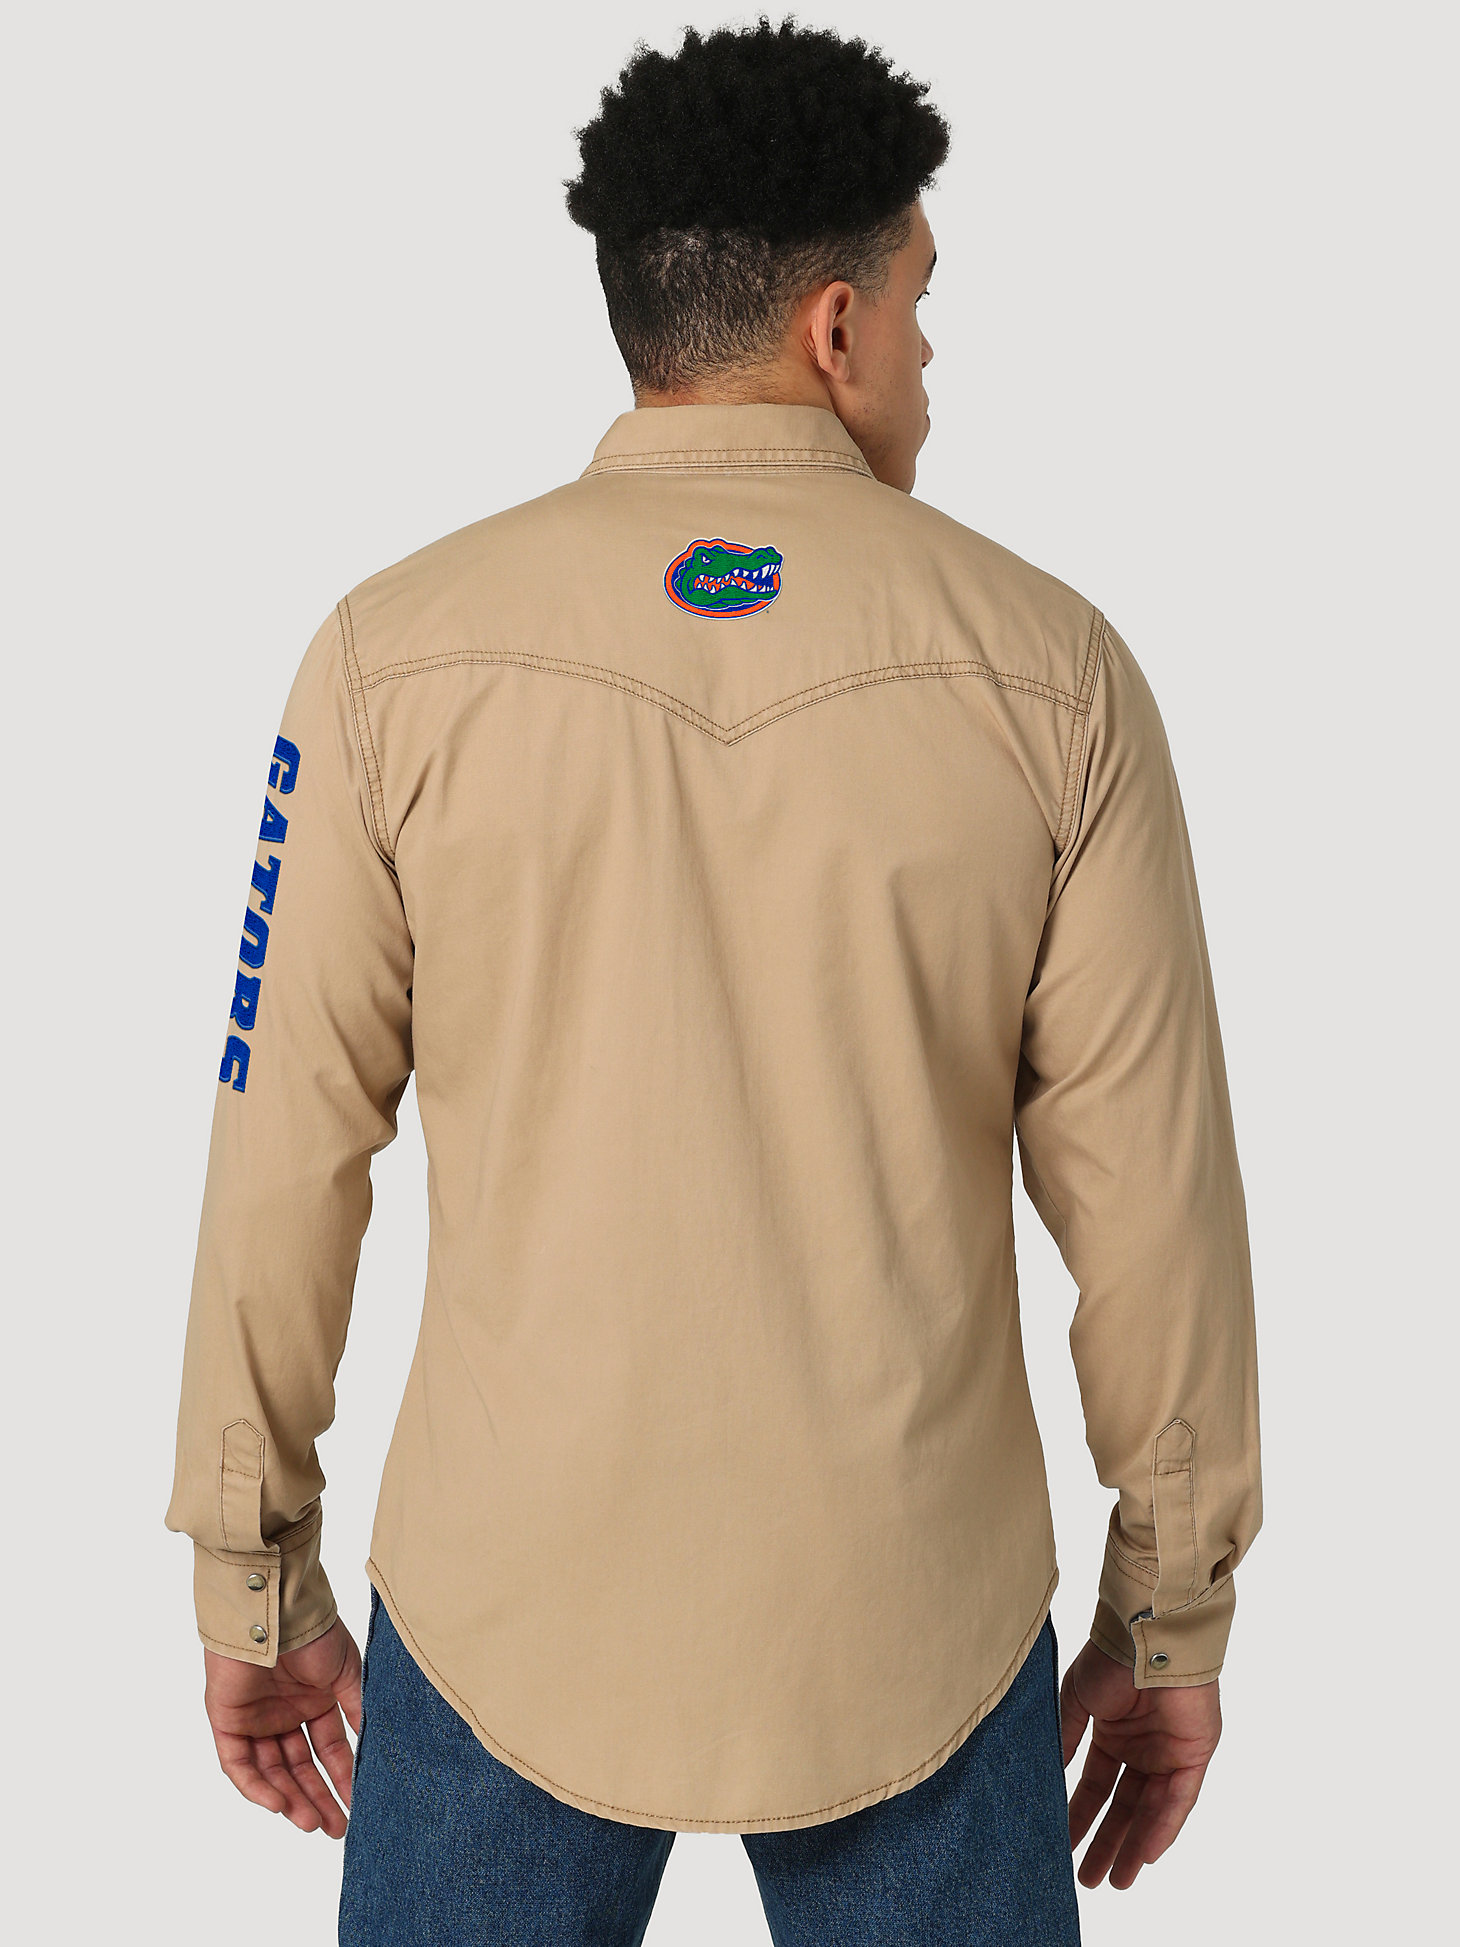 Wrangler Collegiate Embroidered Twill Western Snap Shirt in University of Florida alternative view 1